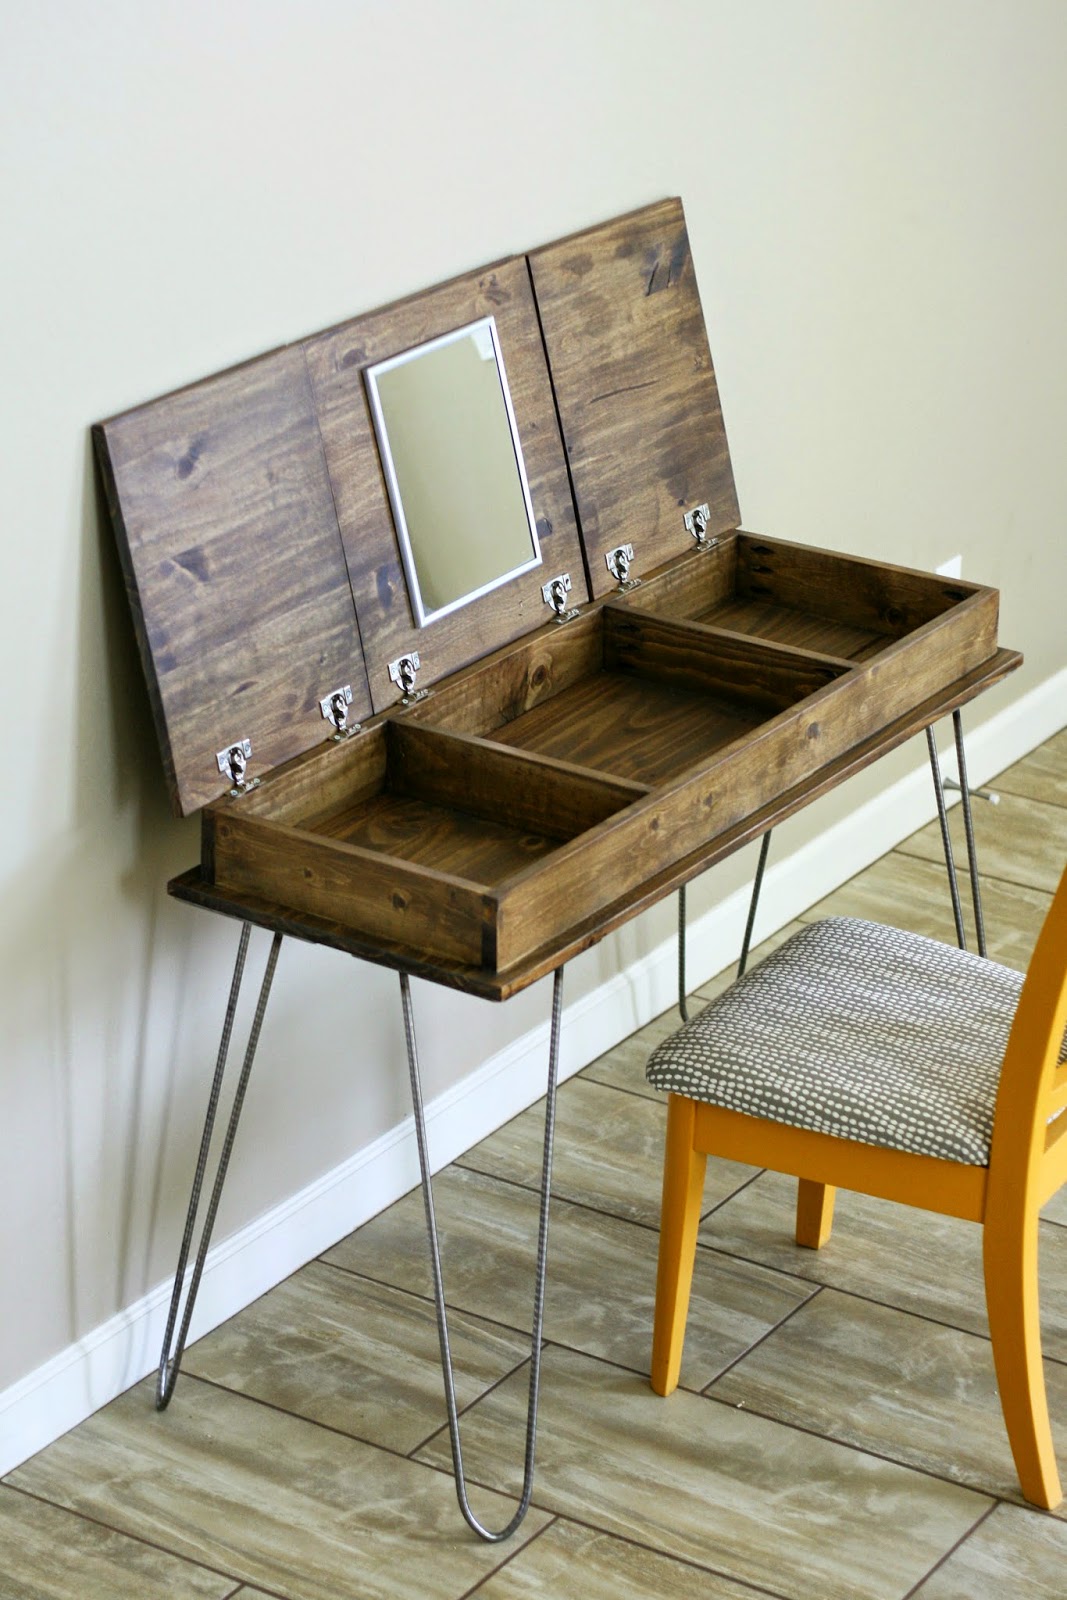 DIY MAKEUP VANITY DESK  With Storage (Plans Available) 